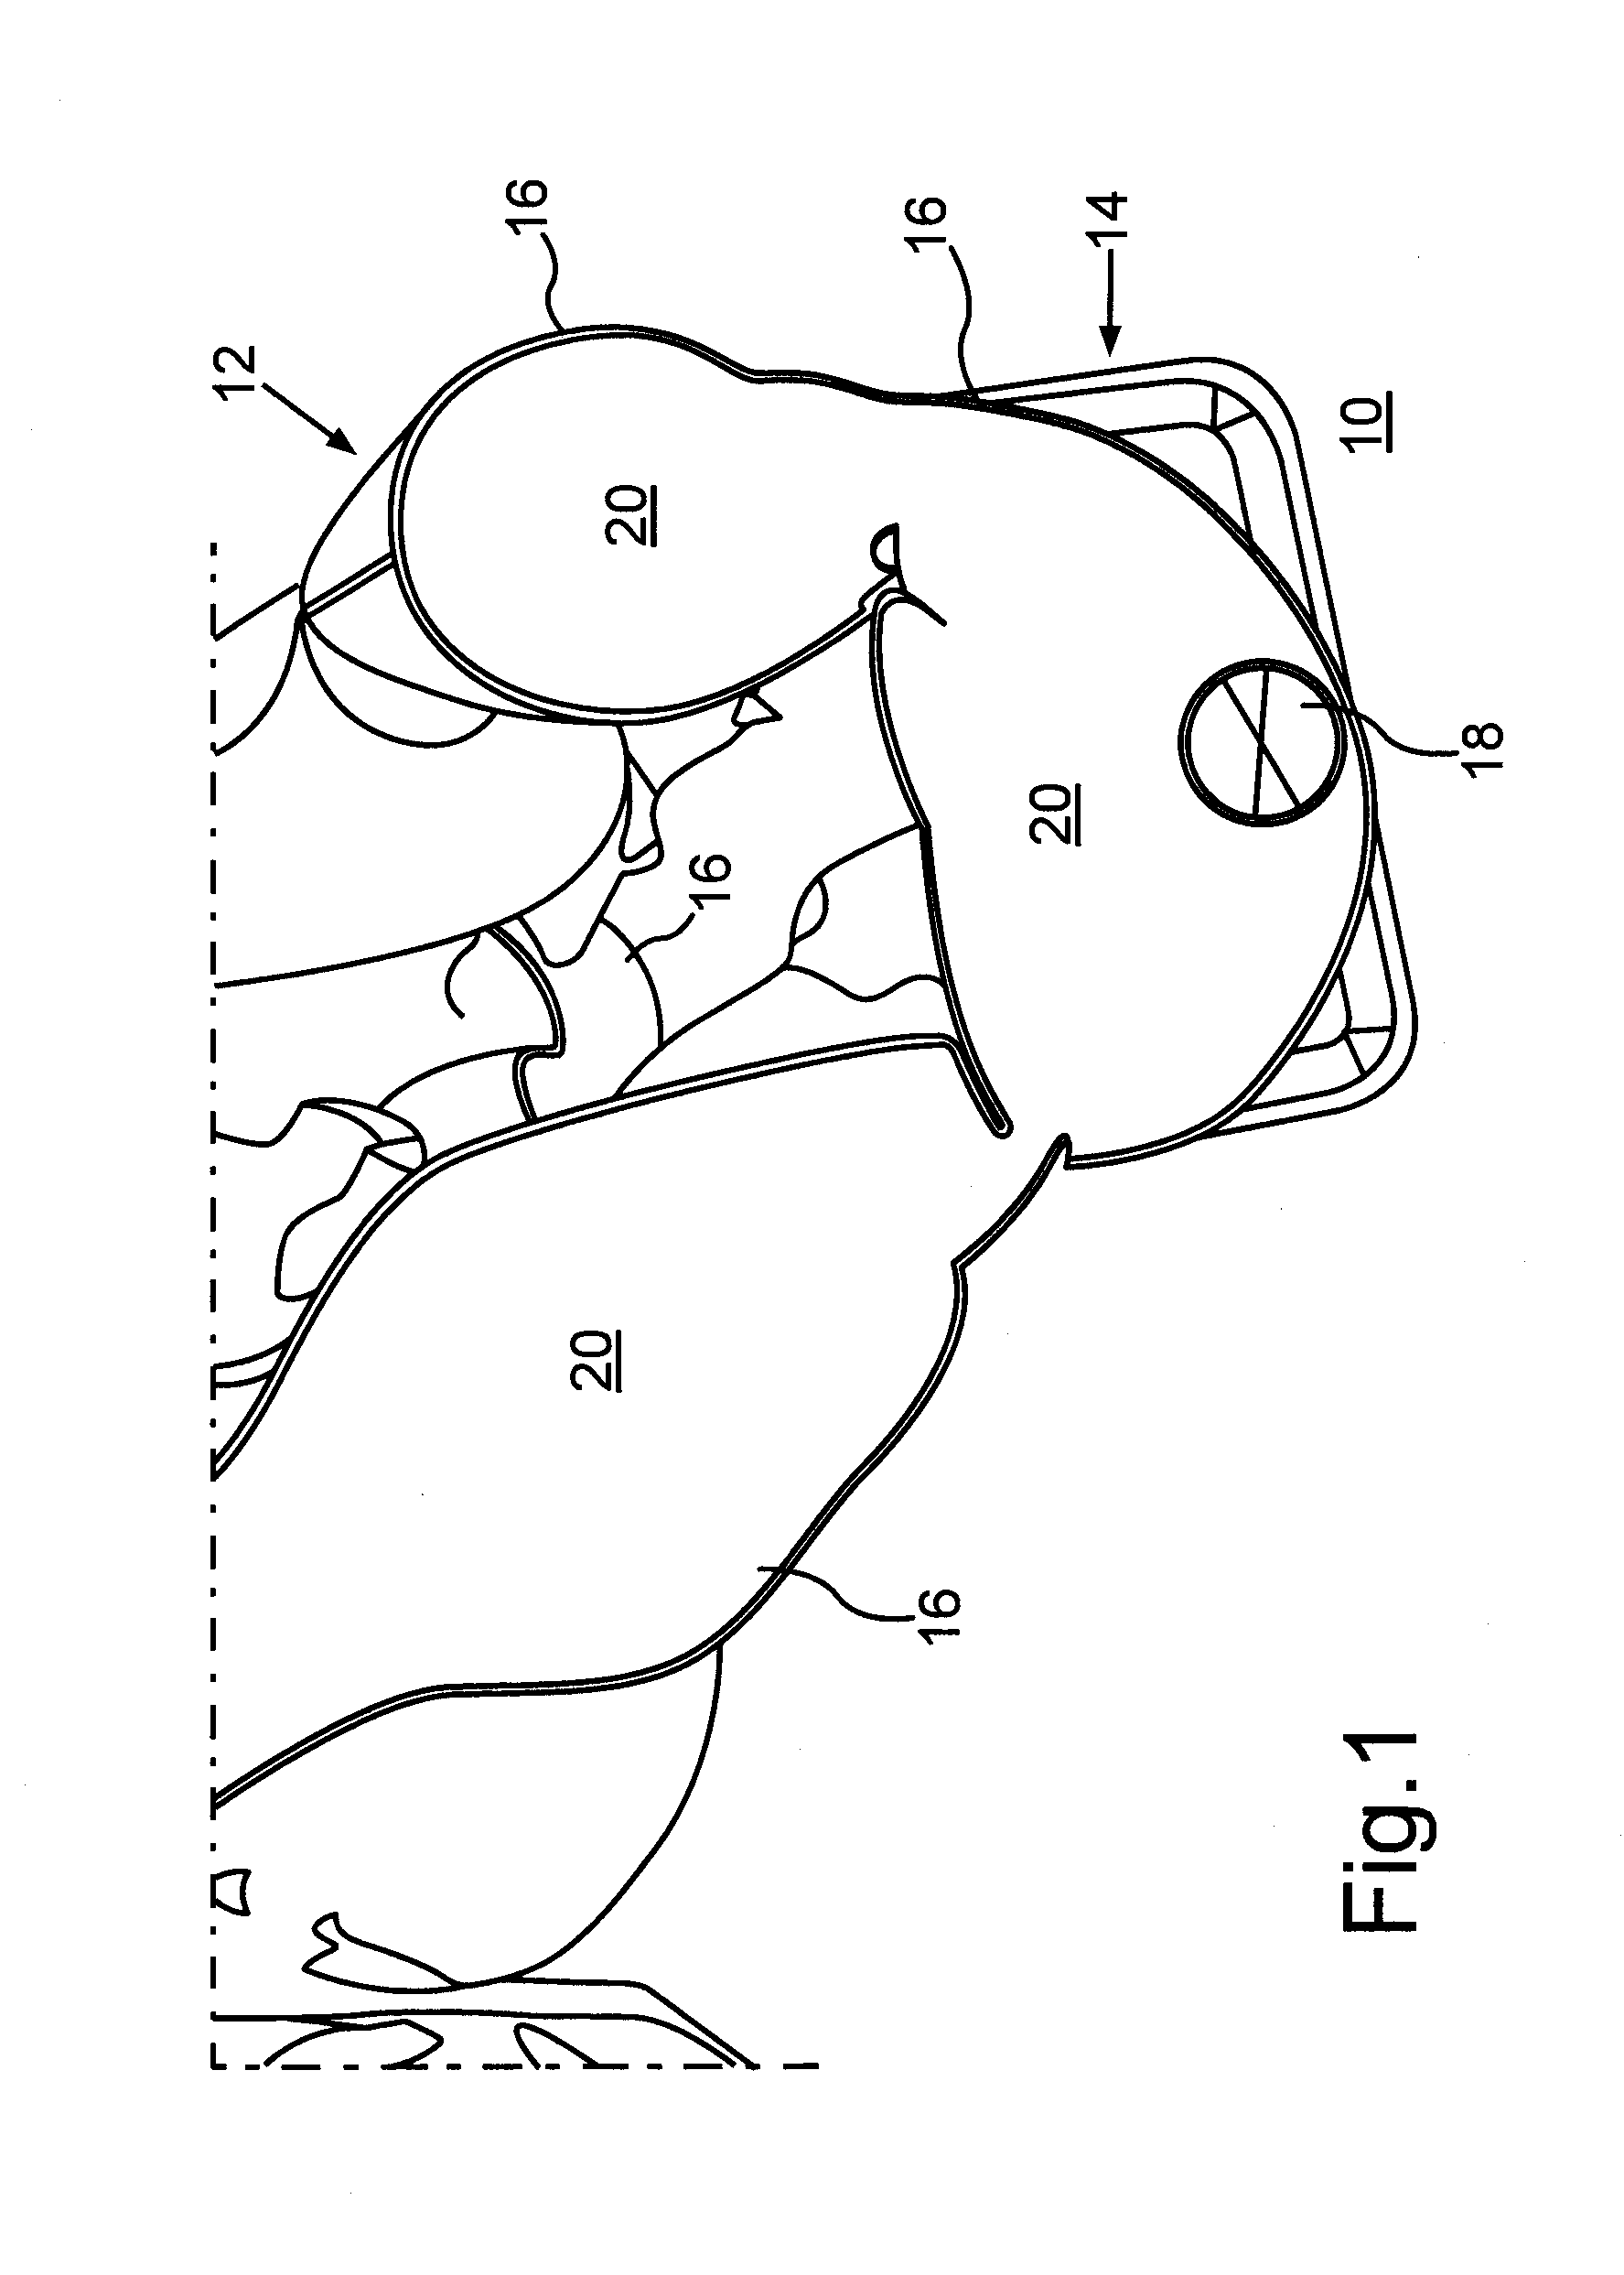 Restraint device, in particular for a motor vehicle